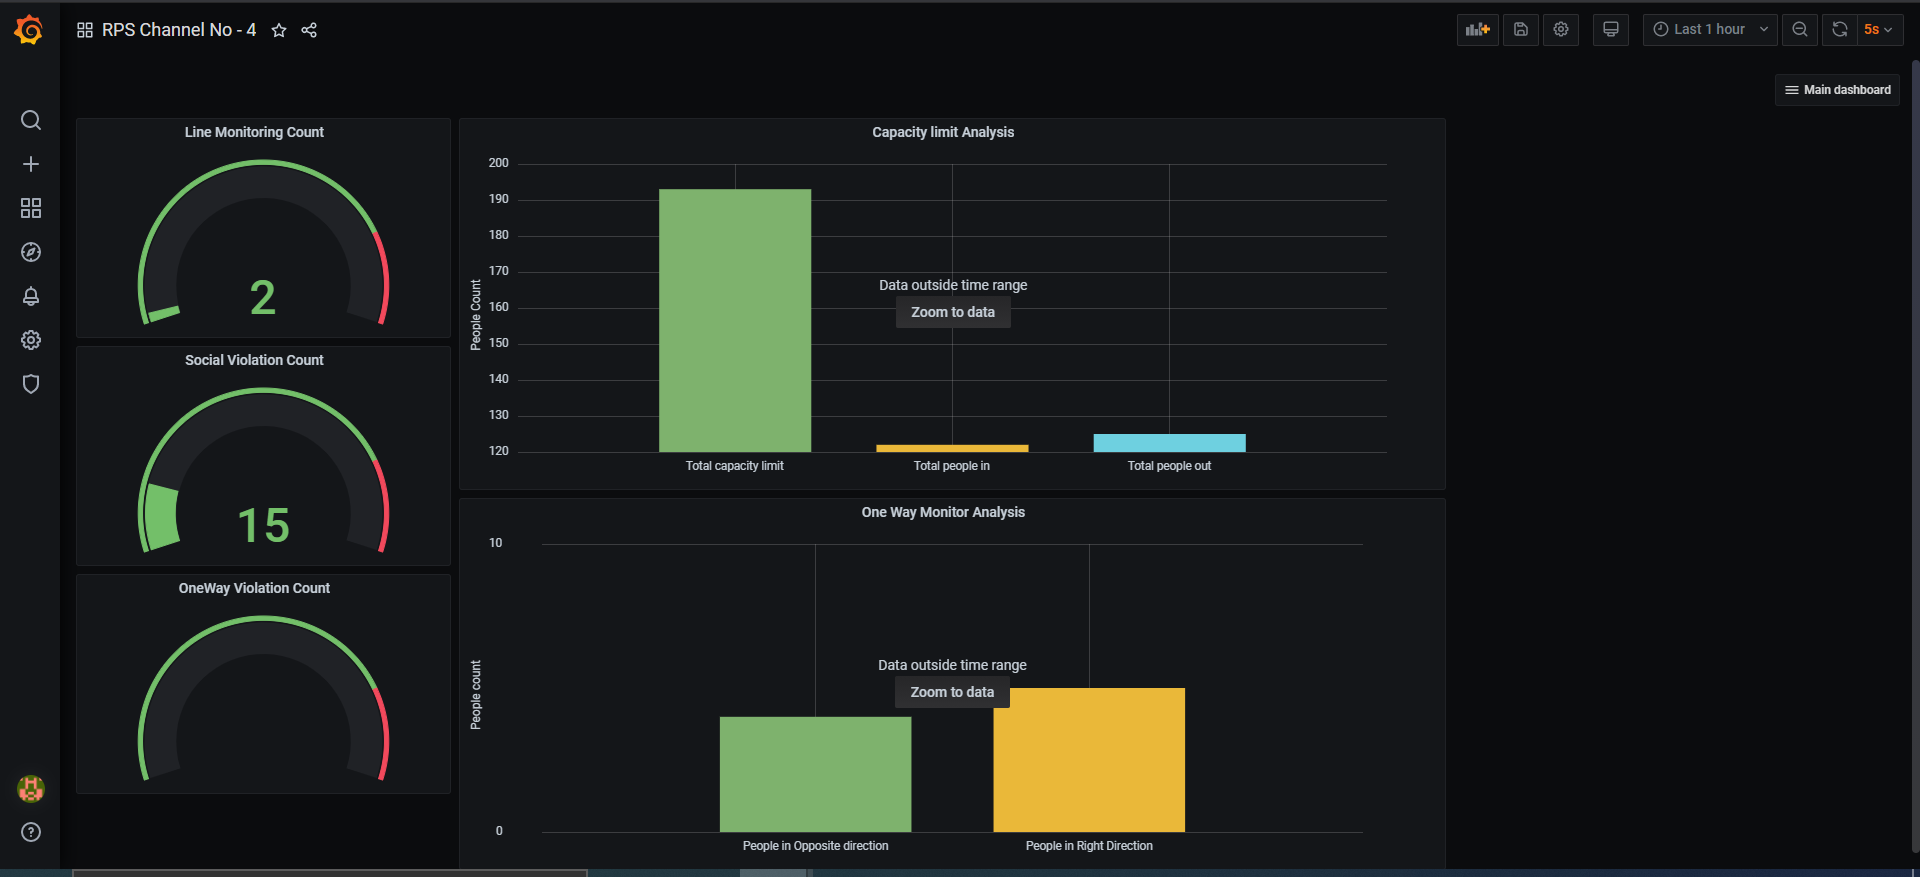 Grafana Dashboard that lists 2 Line monitoring count and 15 social violation counts. 